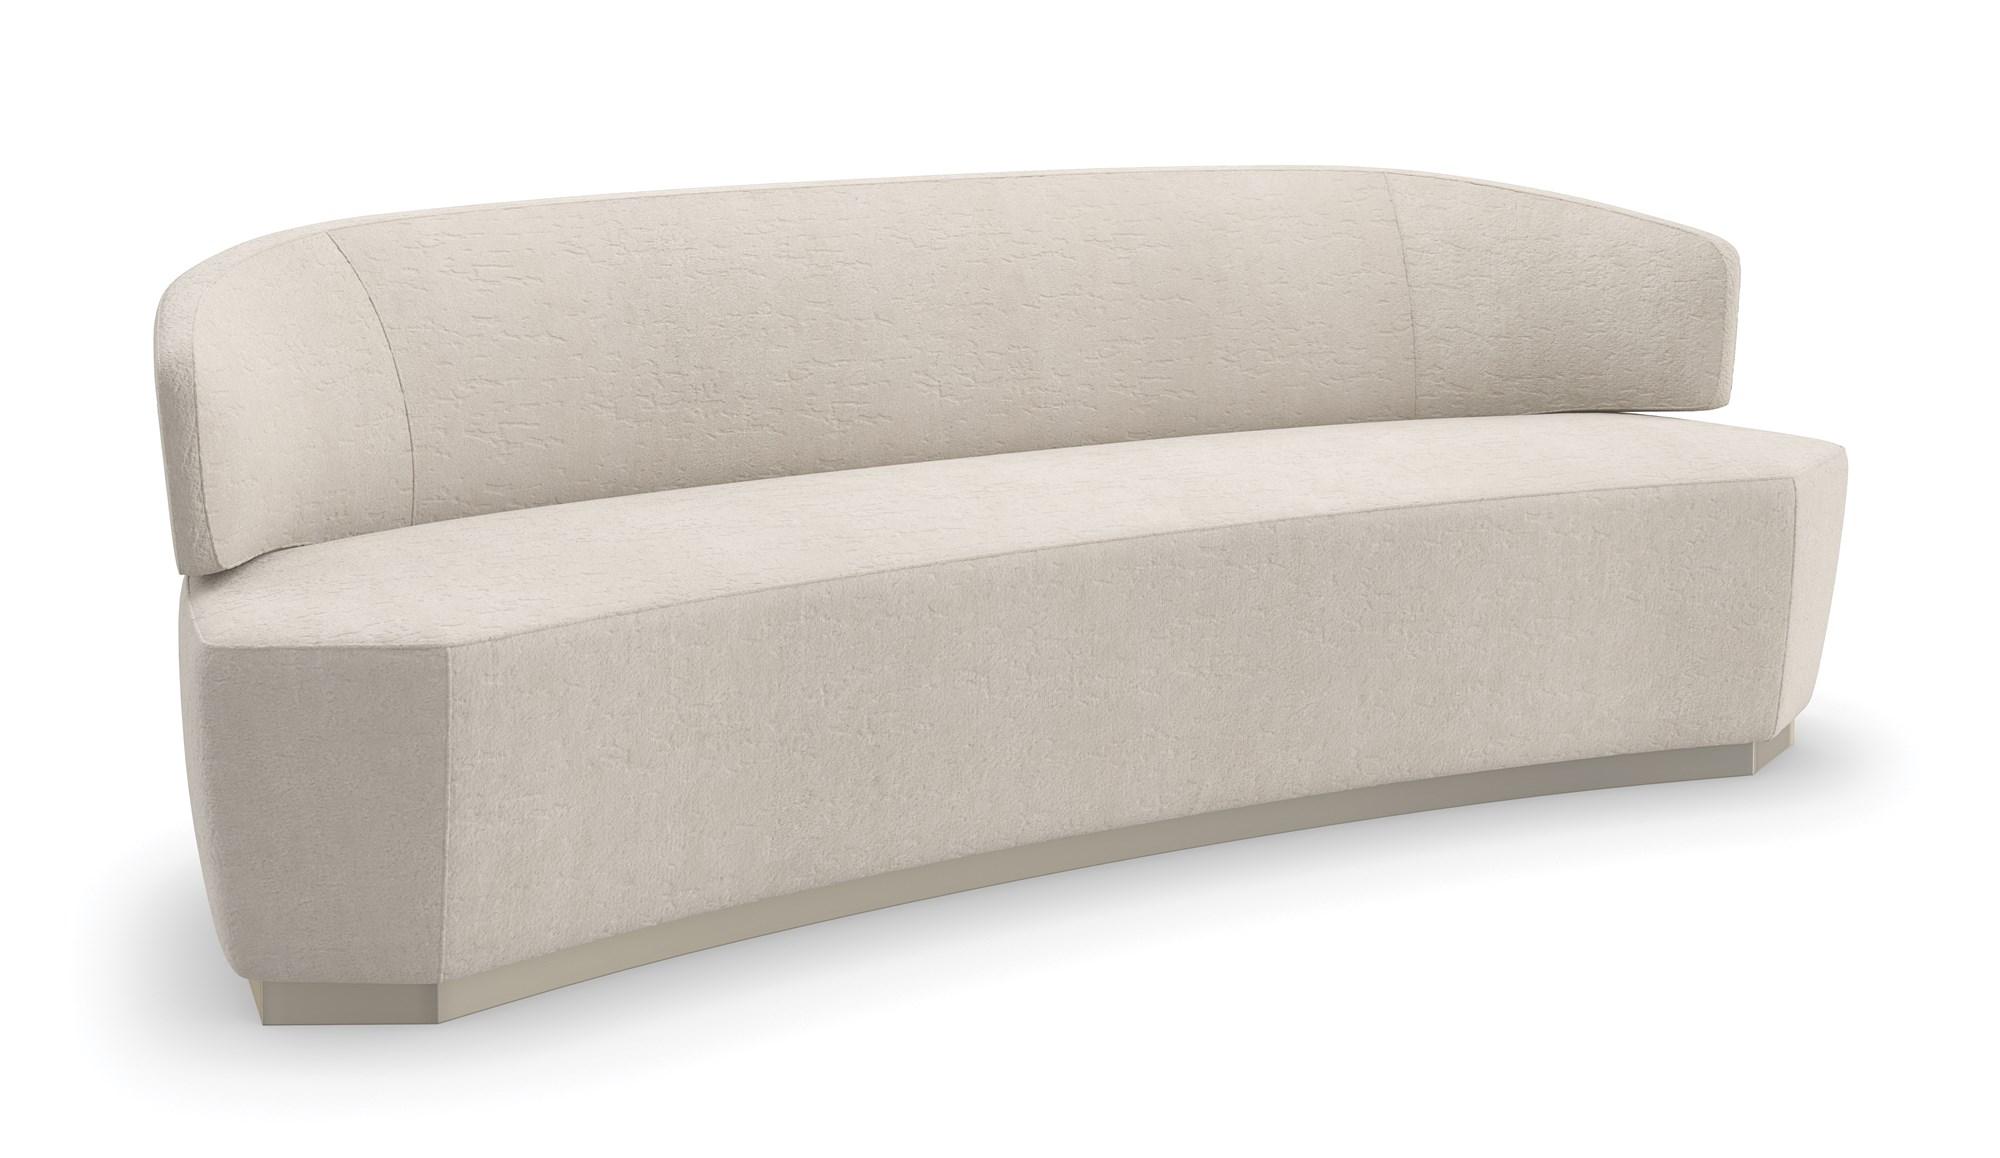 

    
Distressed Ivory Velvet Sparkling Argent Finish OLYMPIA SOFA by Caracole
